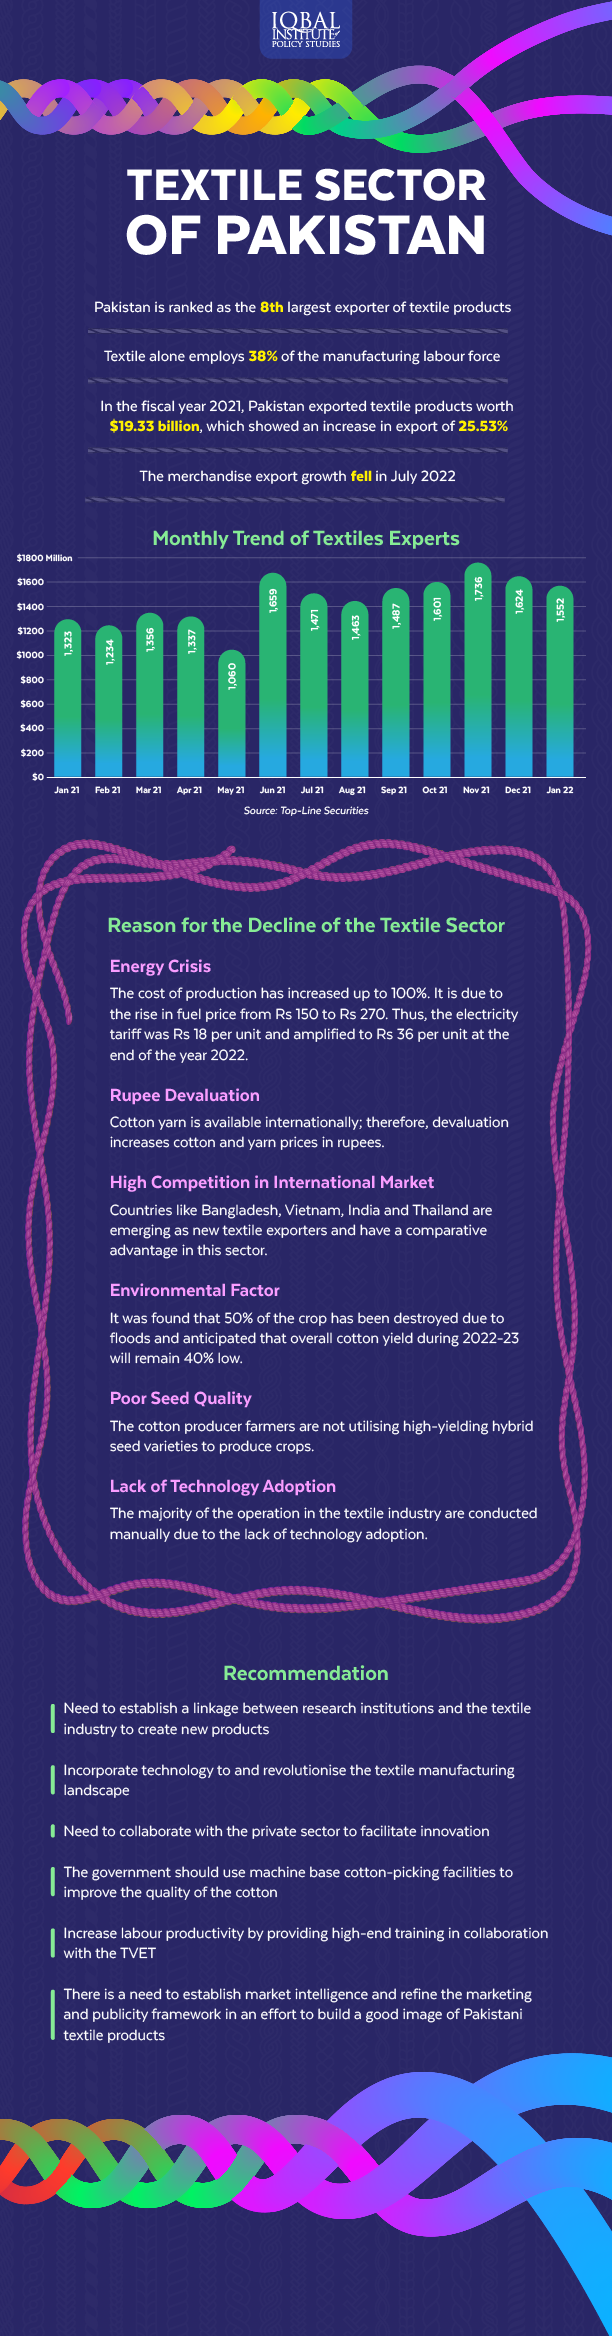 Textile Sector of Pakistan